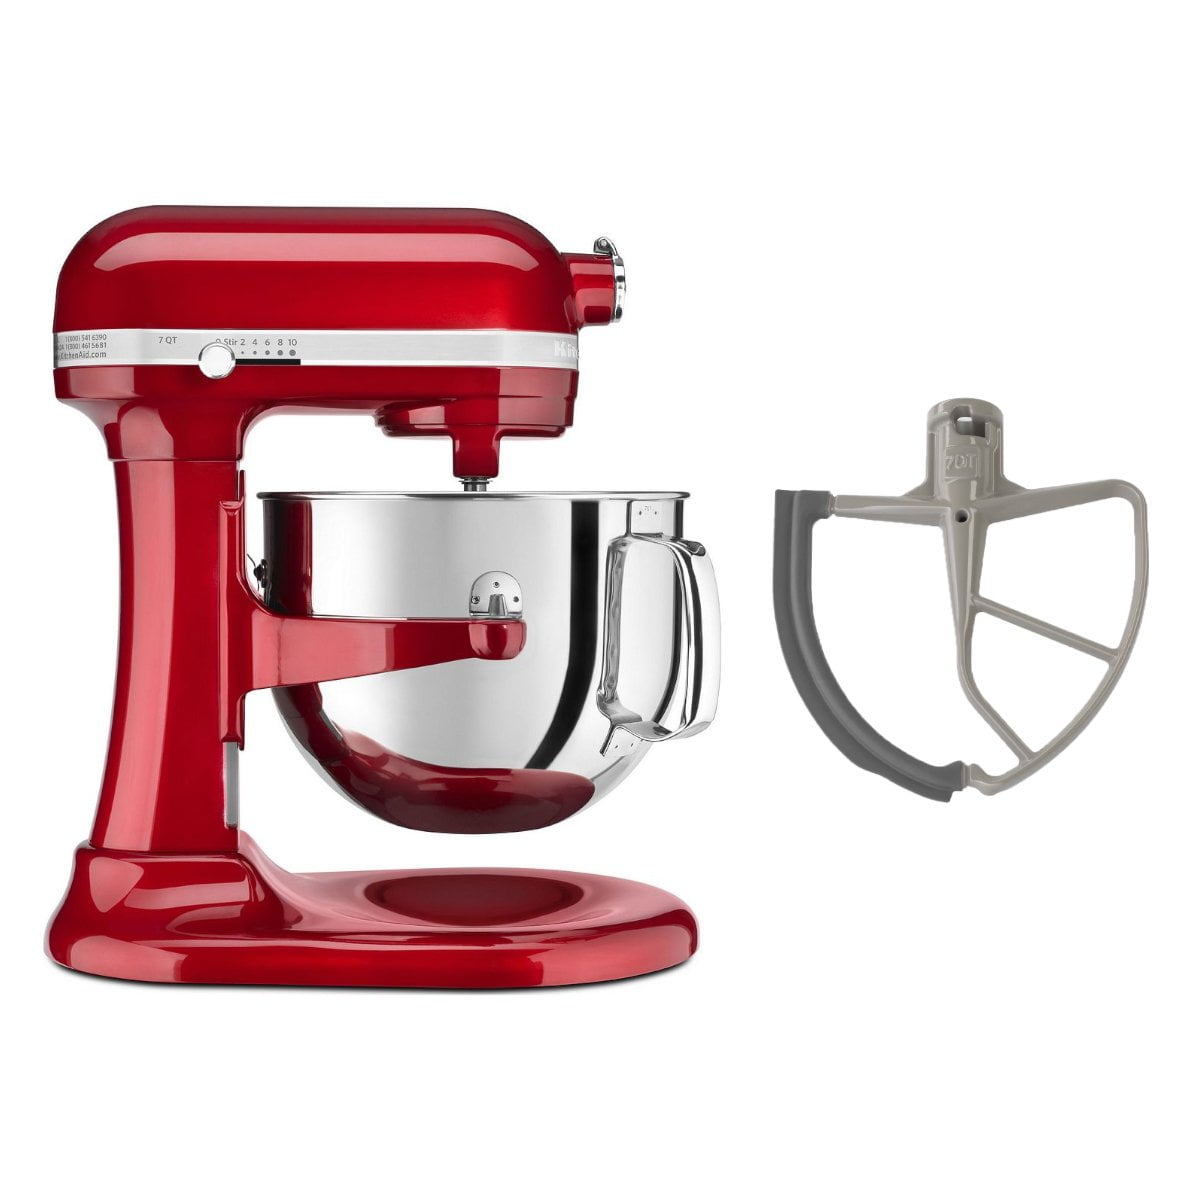 Get the iconic KitchenAid Pro stand mixer for $220 - CNET